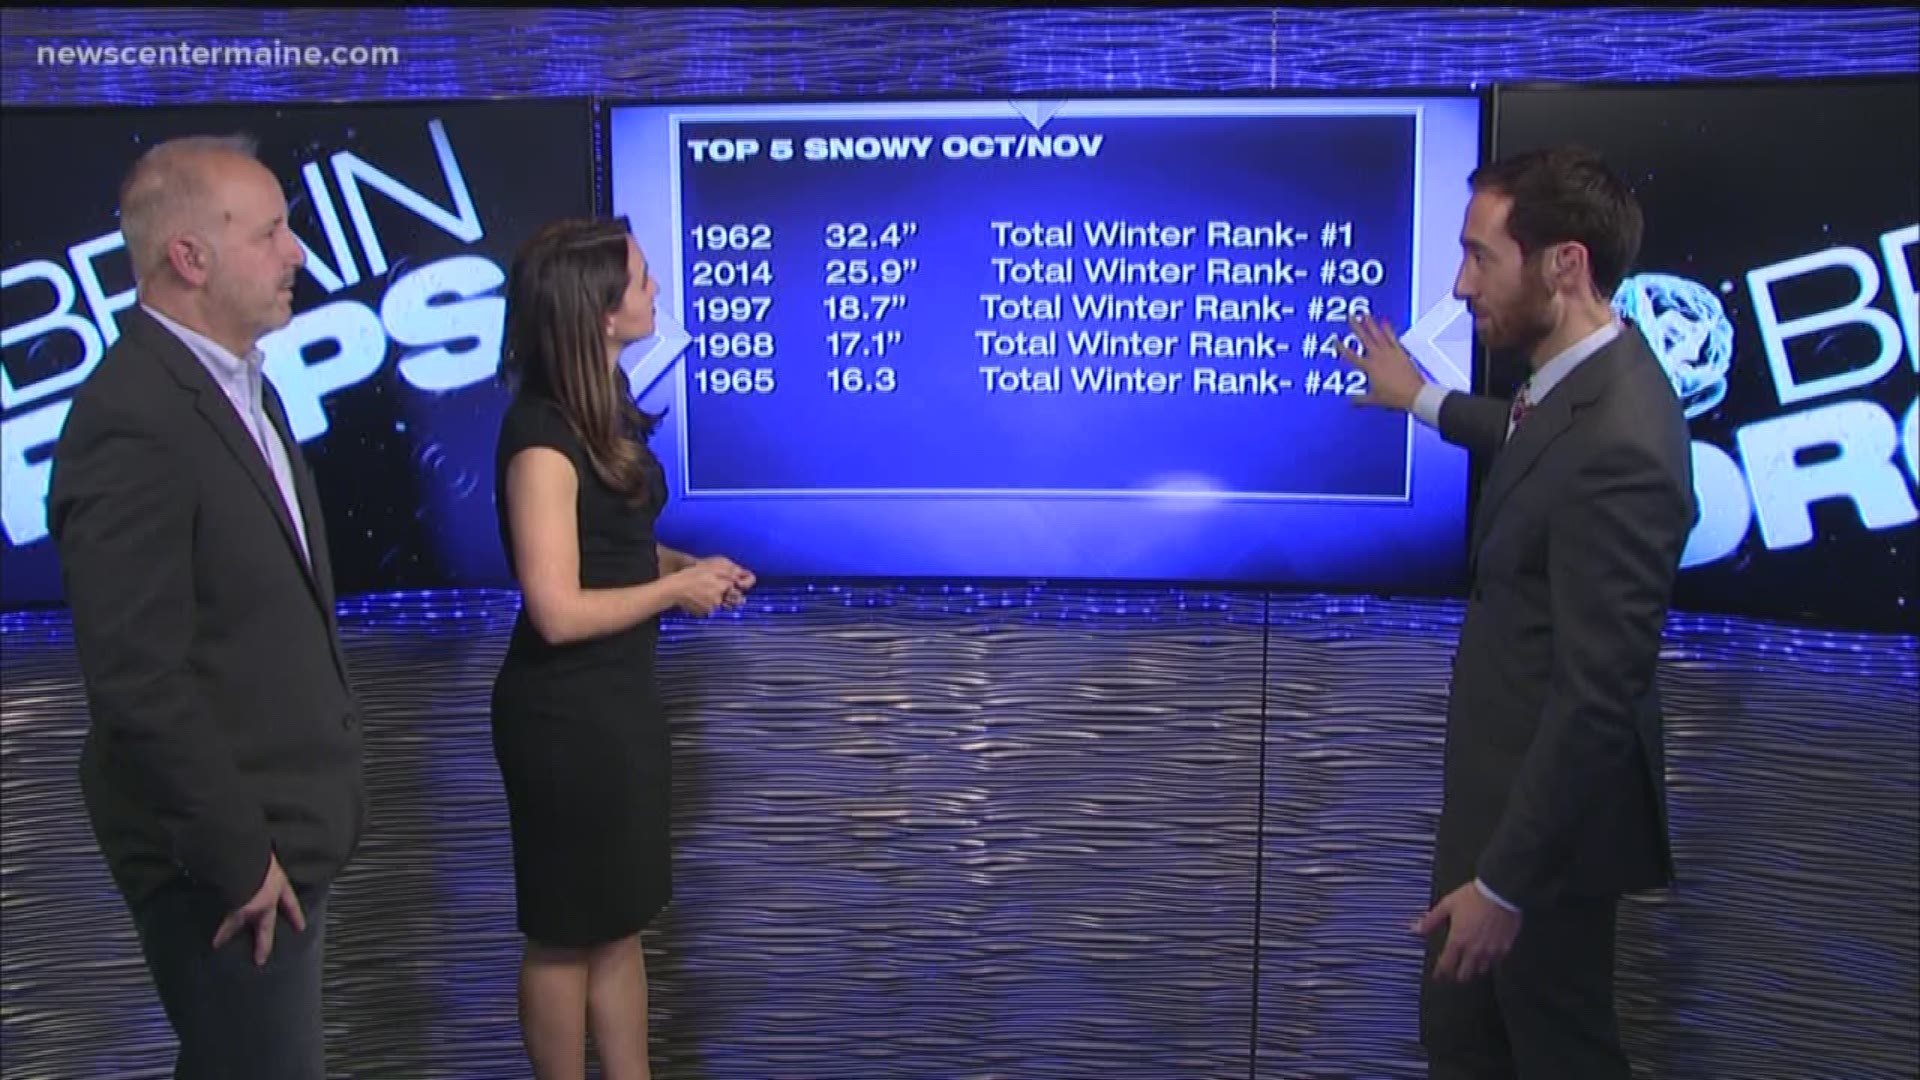 Does an early snowfall mean greater snow total amounts for that winter?